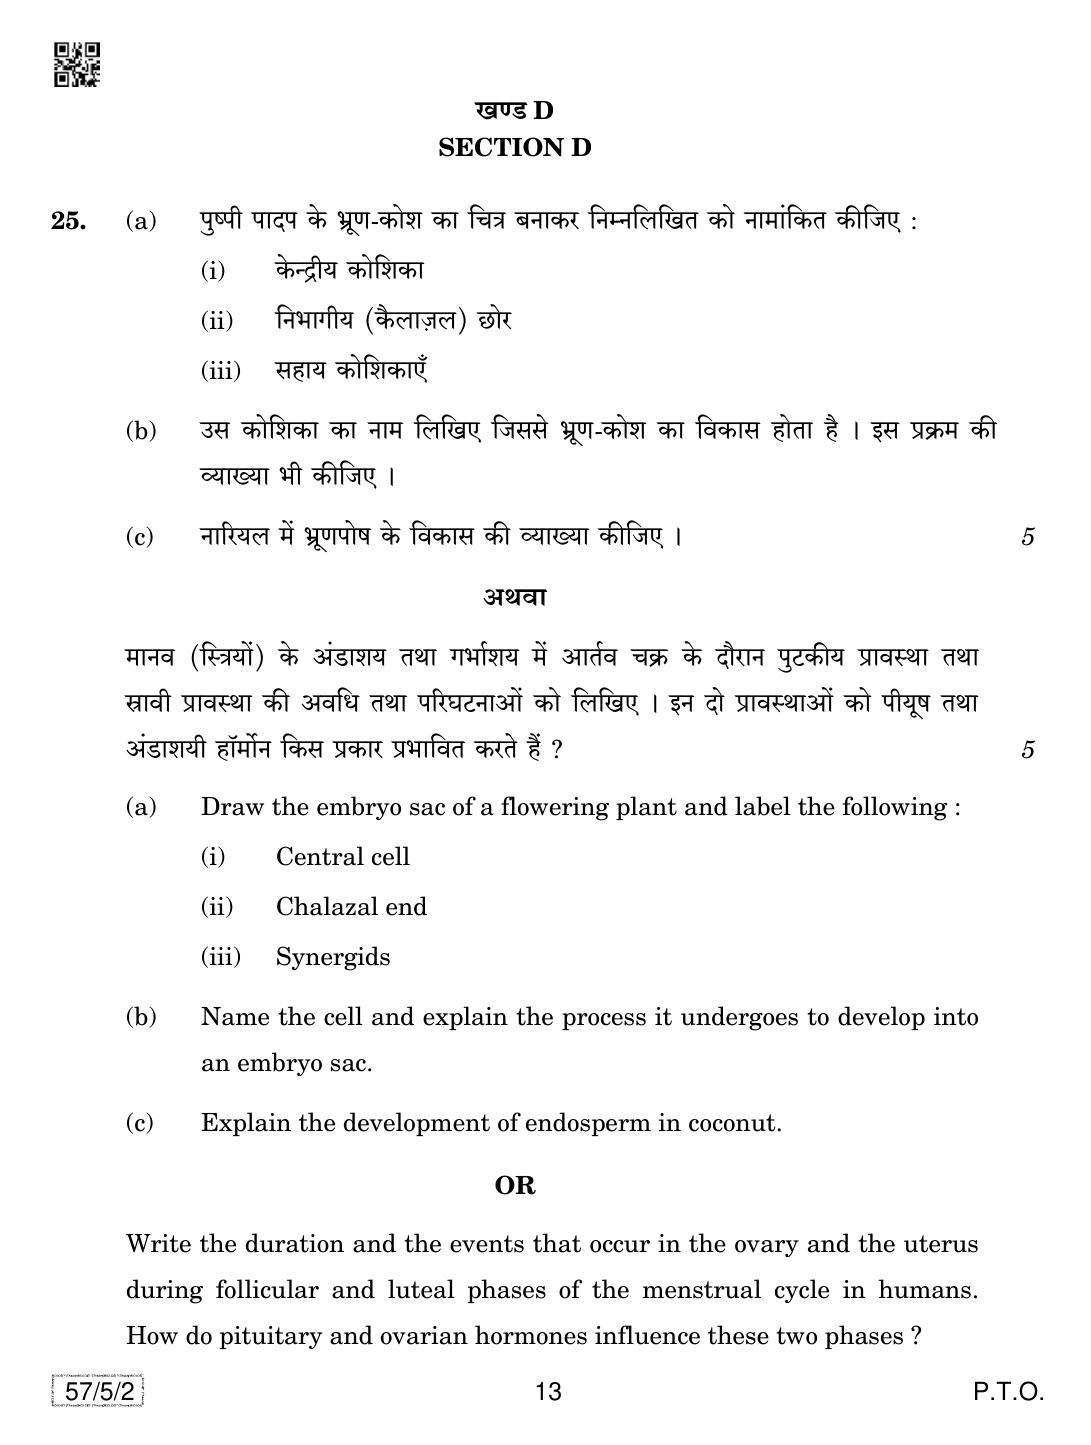 CBSE Class 12 57-5-2 Biology 2019 Question Paper - Page 13